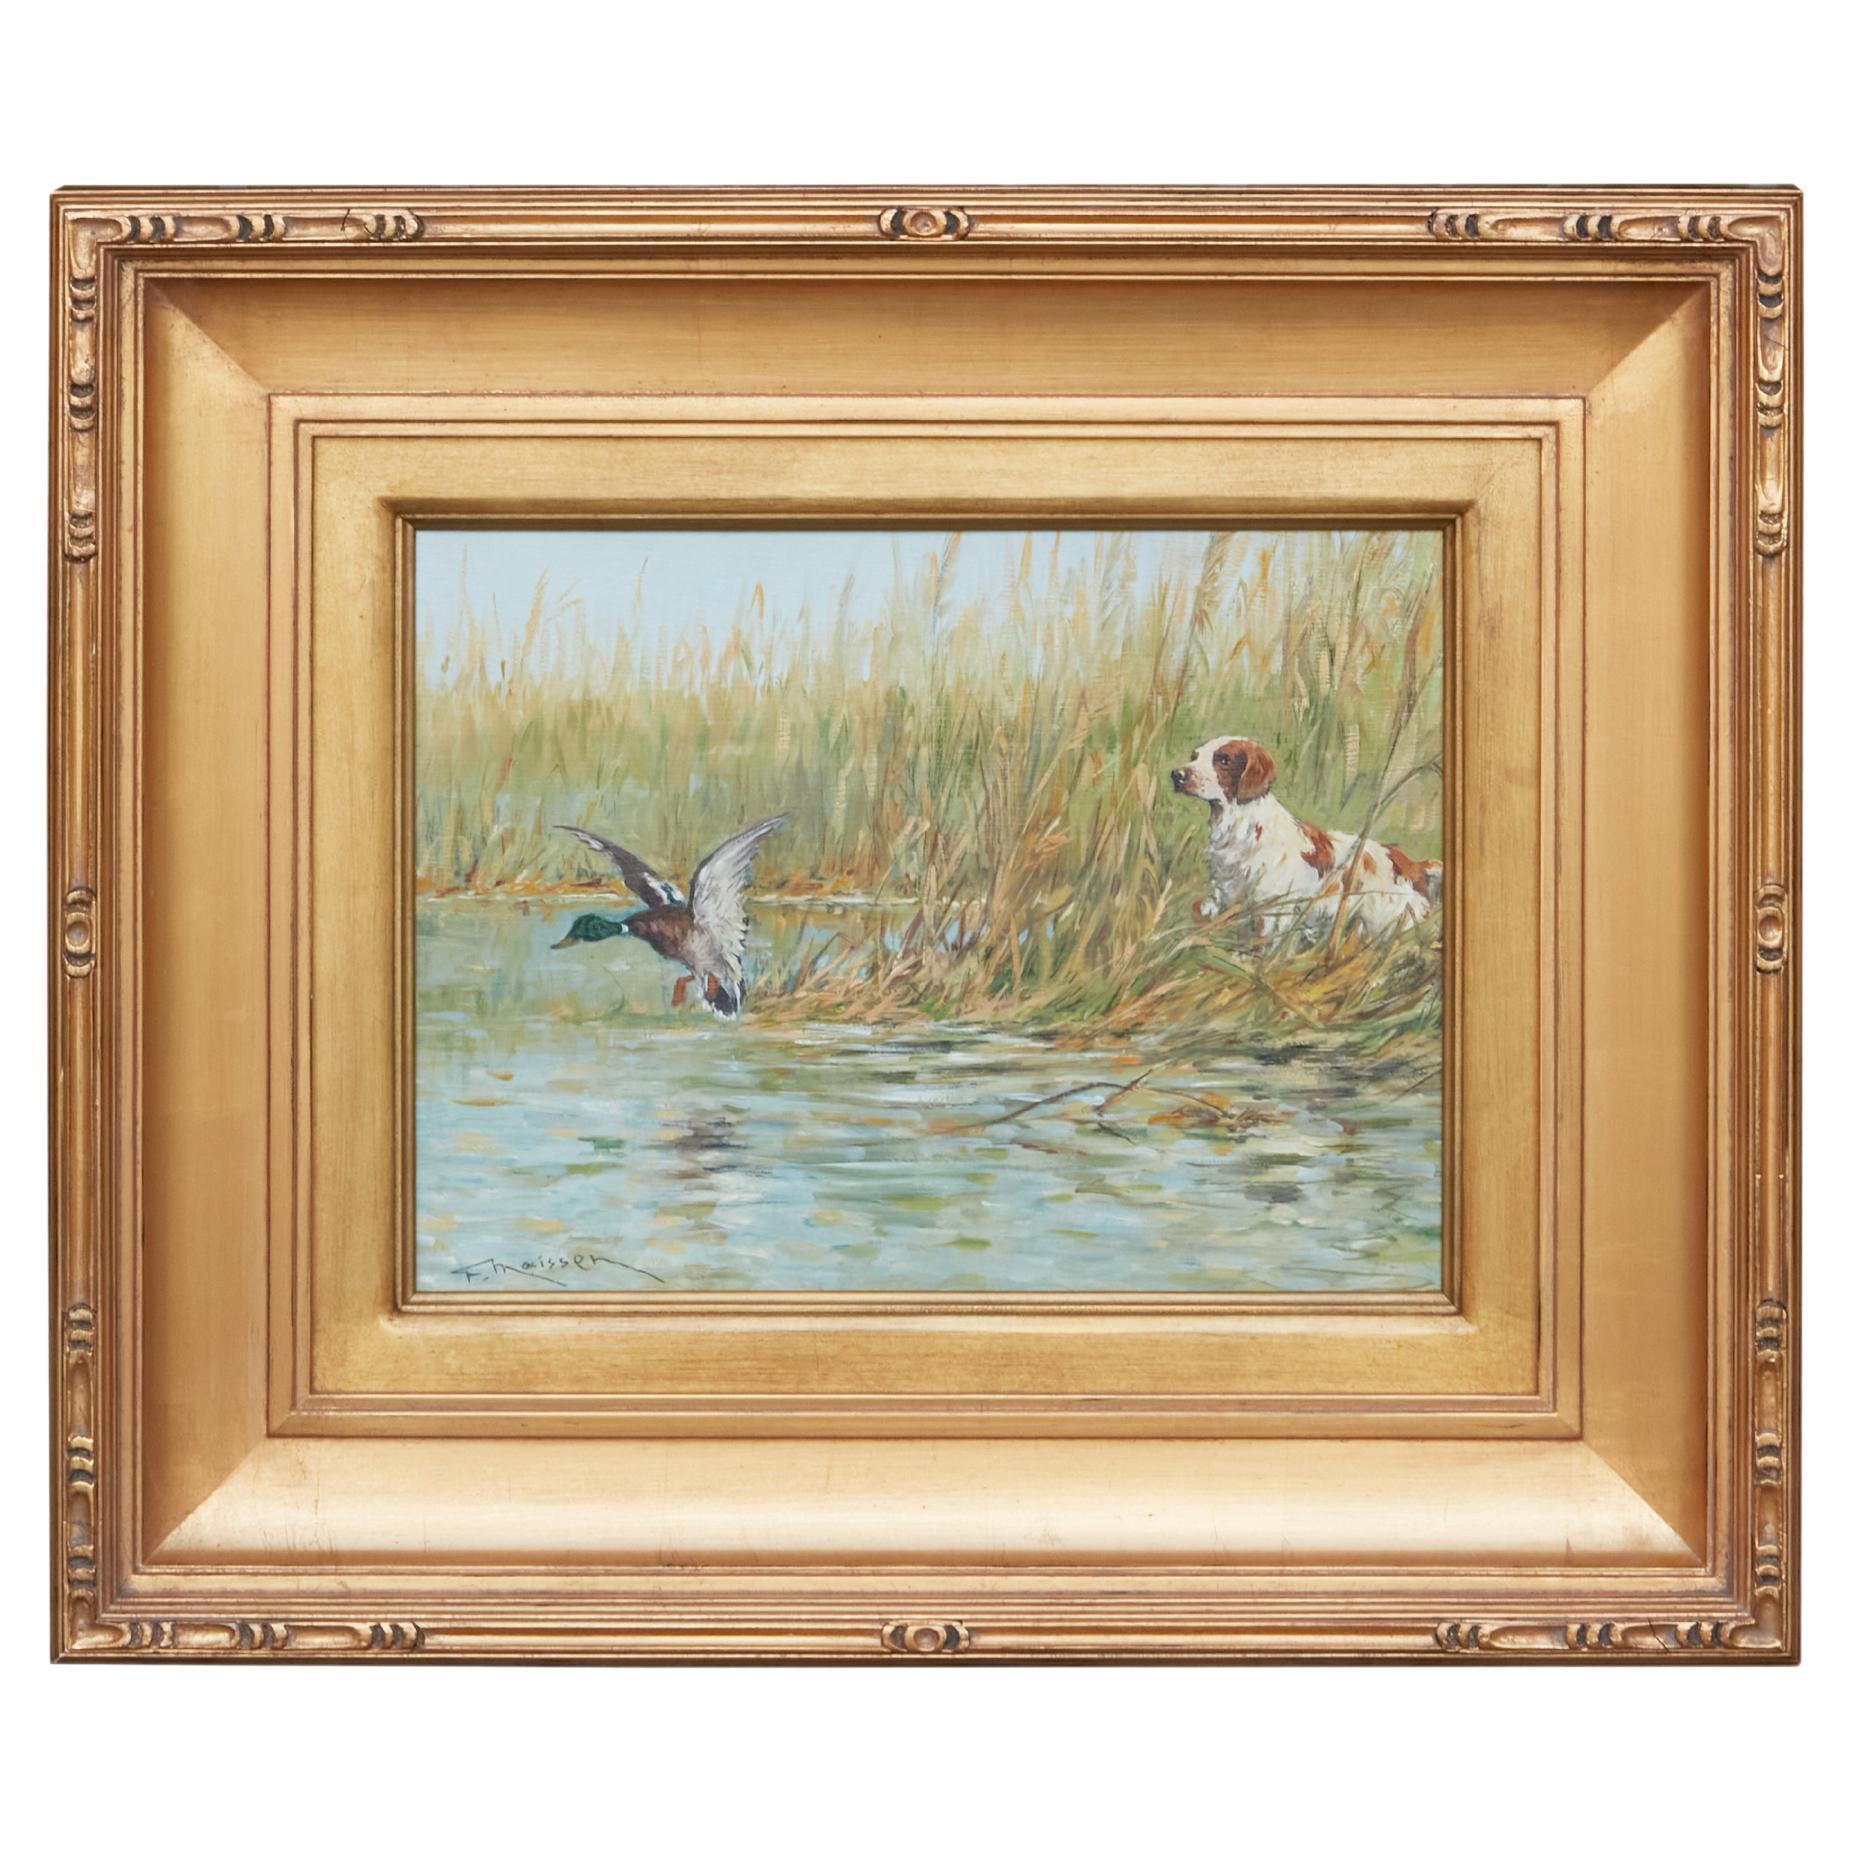 Fernand Maissen Oil on Panel Painting Depicting a Setter Hunting a River Mallard